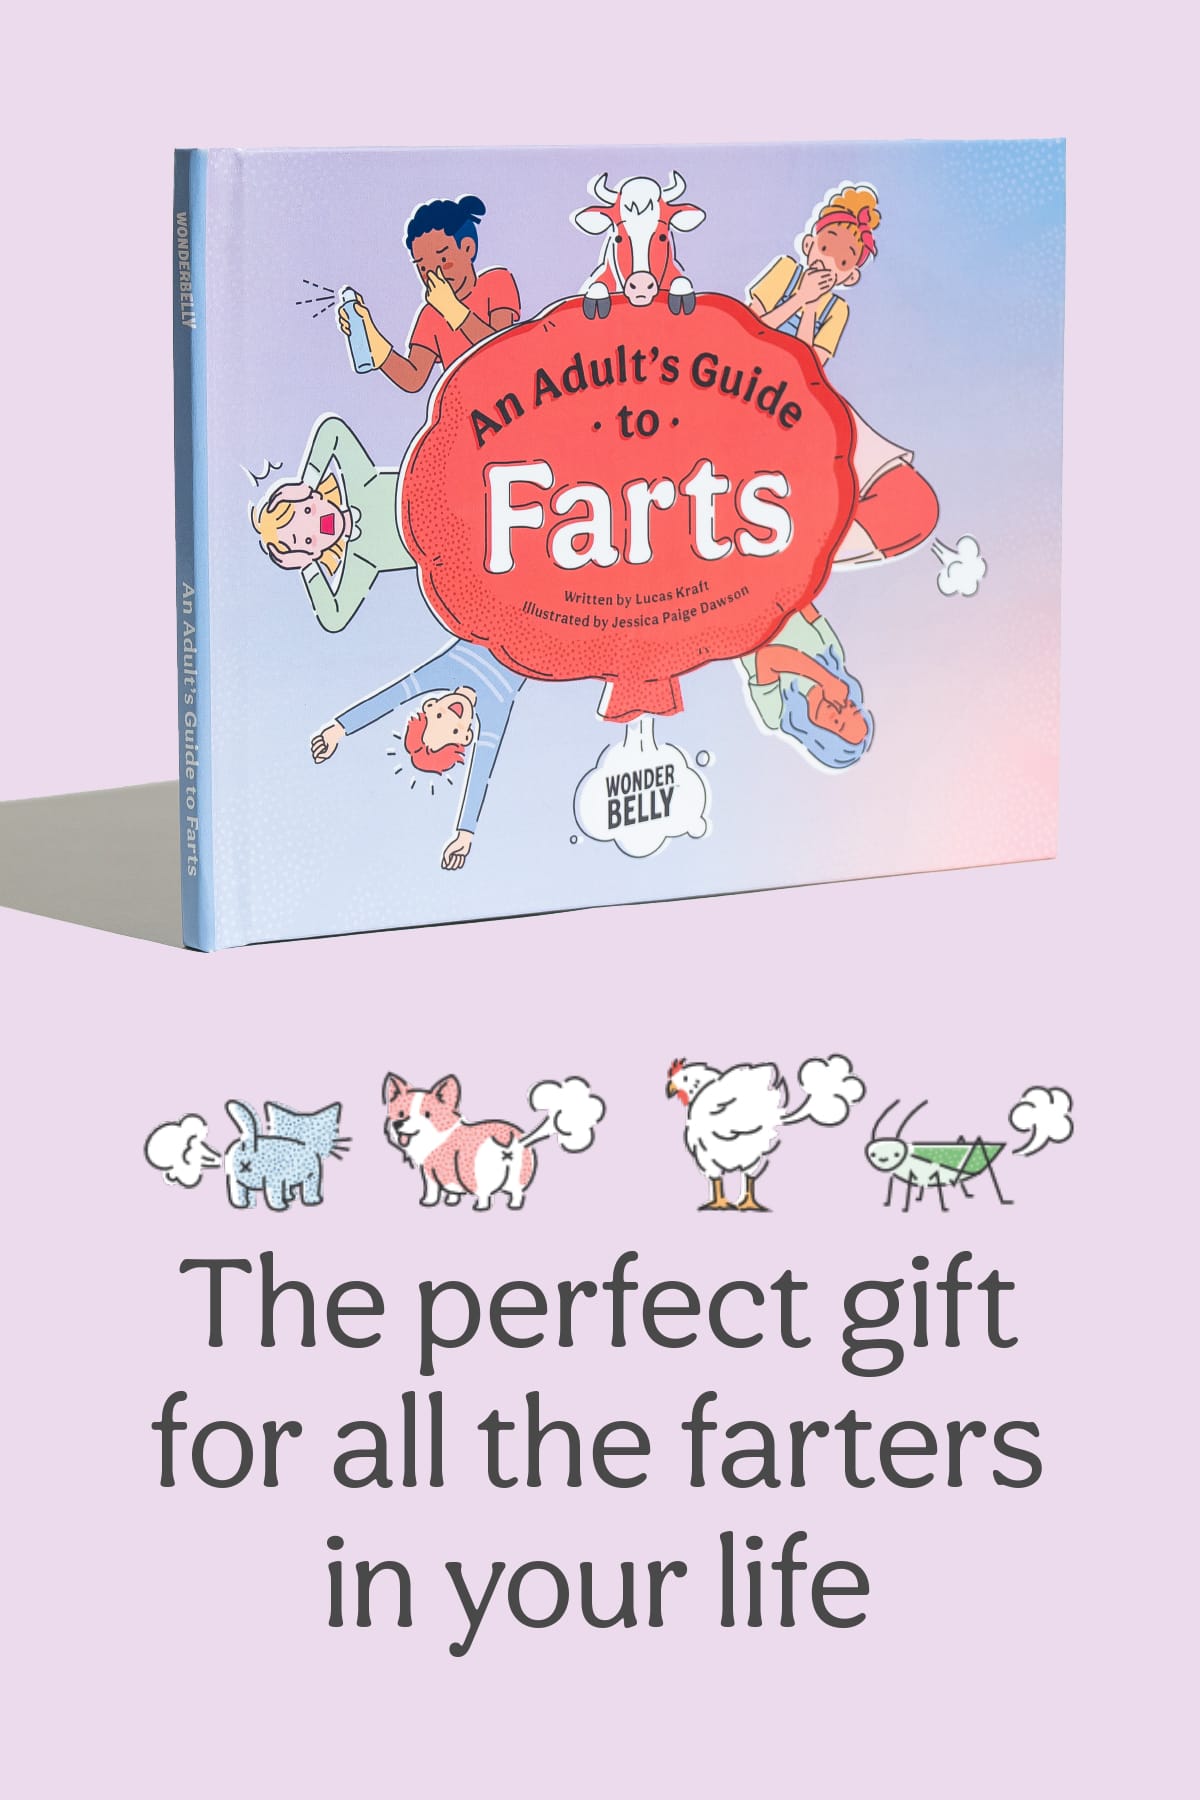 The perfect gift for all the farters in your life